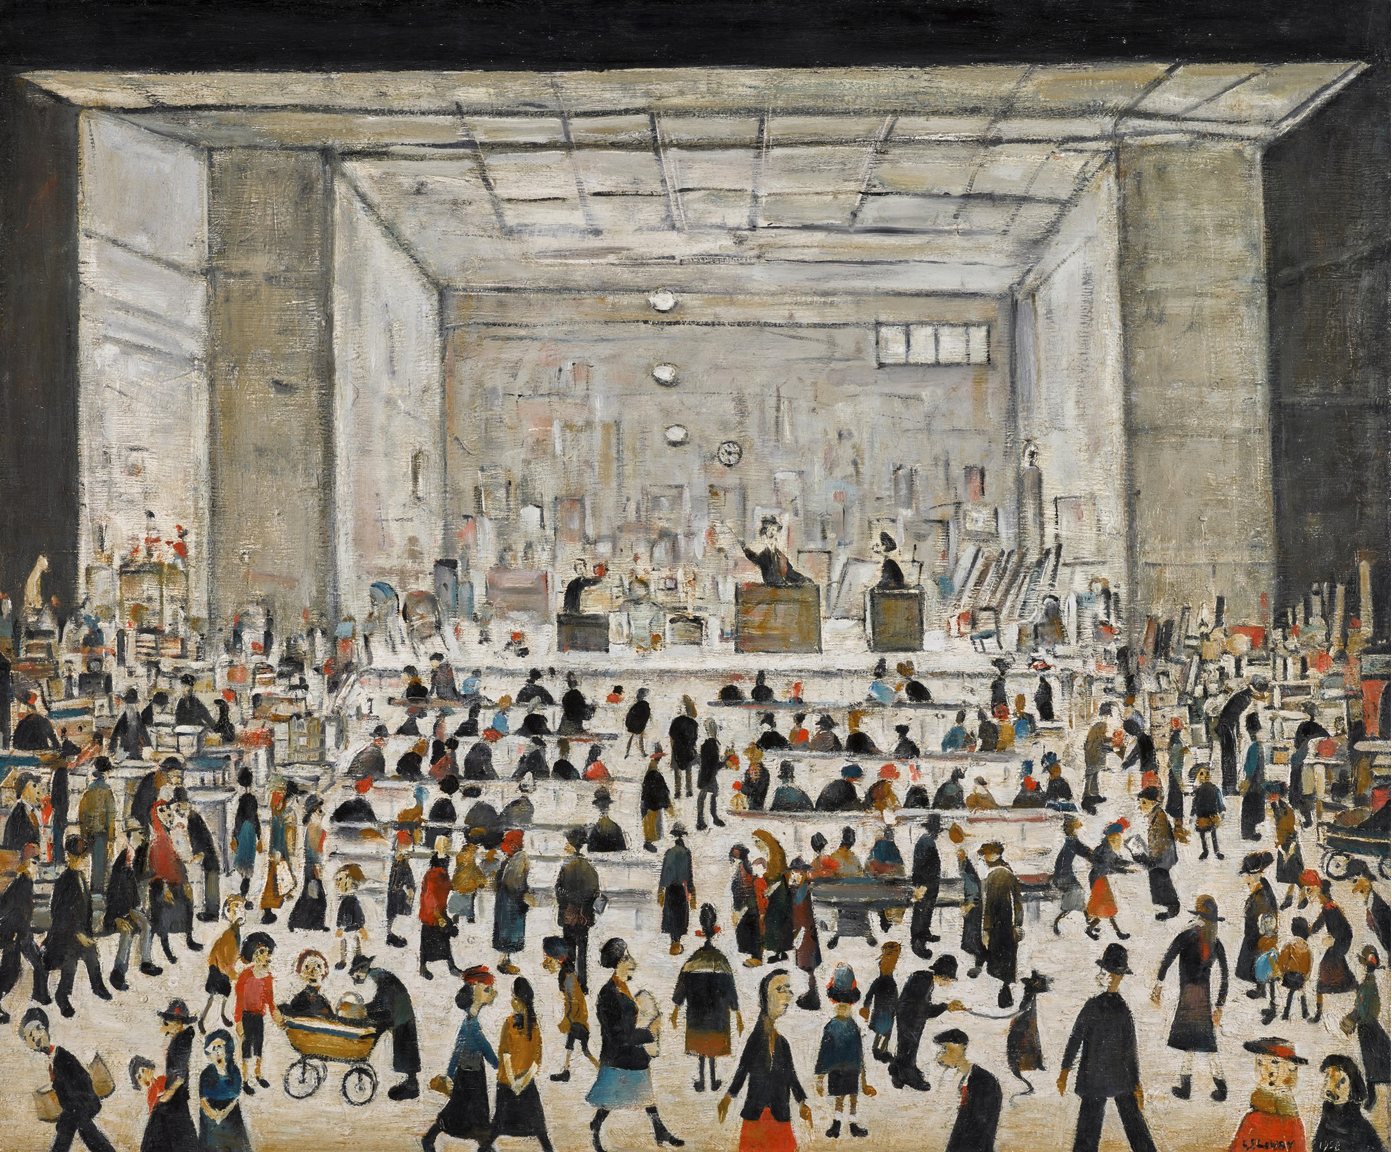 The Auction (1958) by Laurence Stephen Lowry (1887 - 1976), English artist.